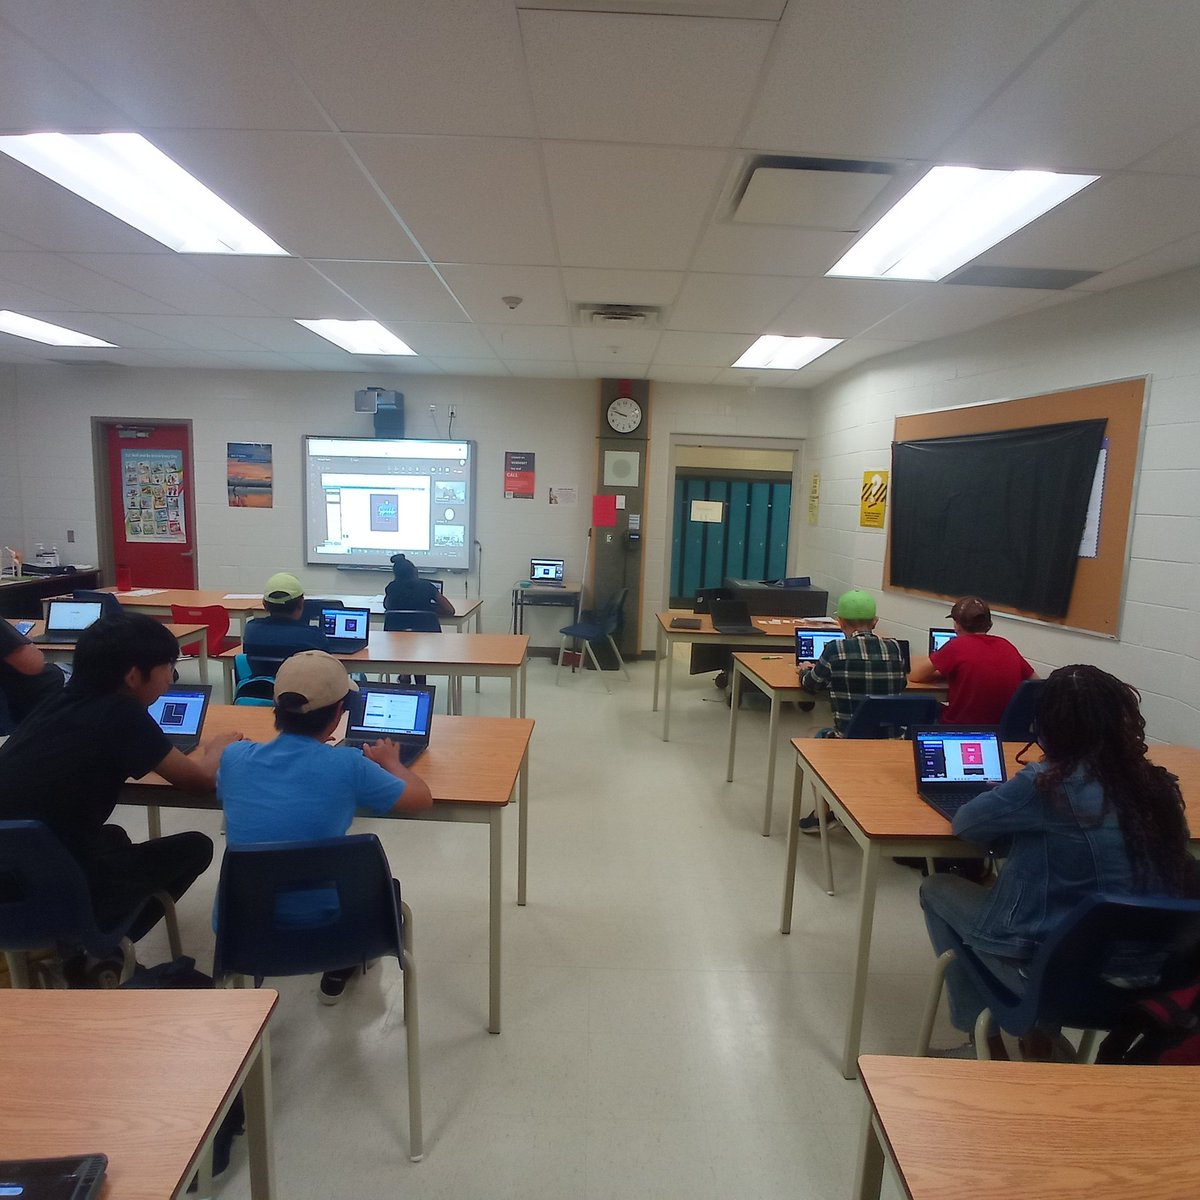 Thank you to @skillsontario for the virtual business workshop where students explored @canva to create logos for a future business.
#futureleaders
#creativity #techskills #literacyskills
@SMCDSB_ConEd